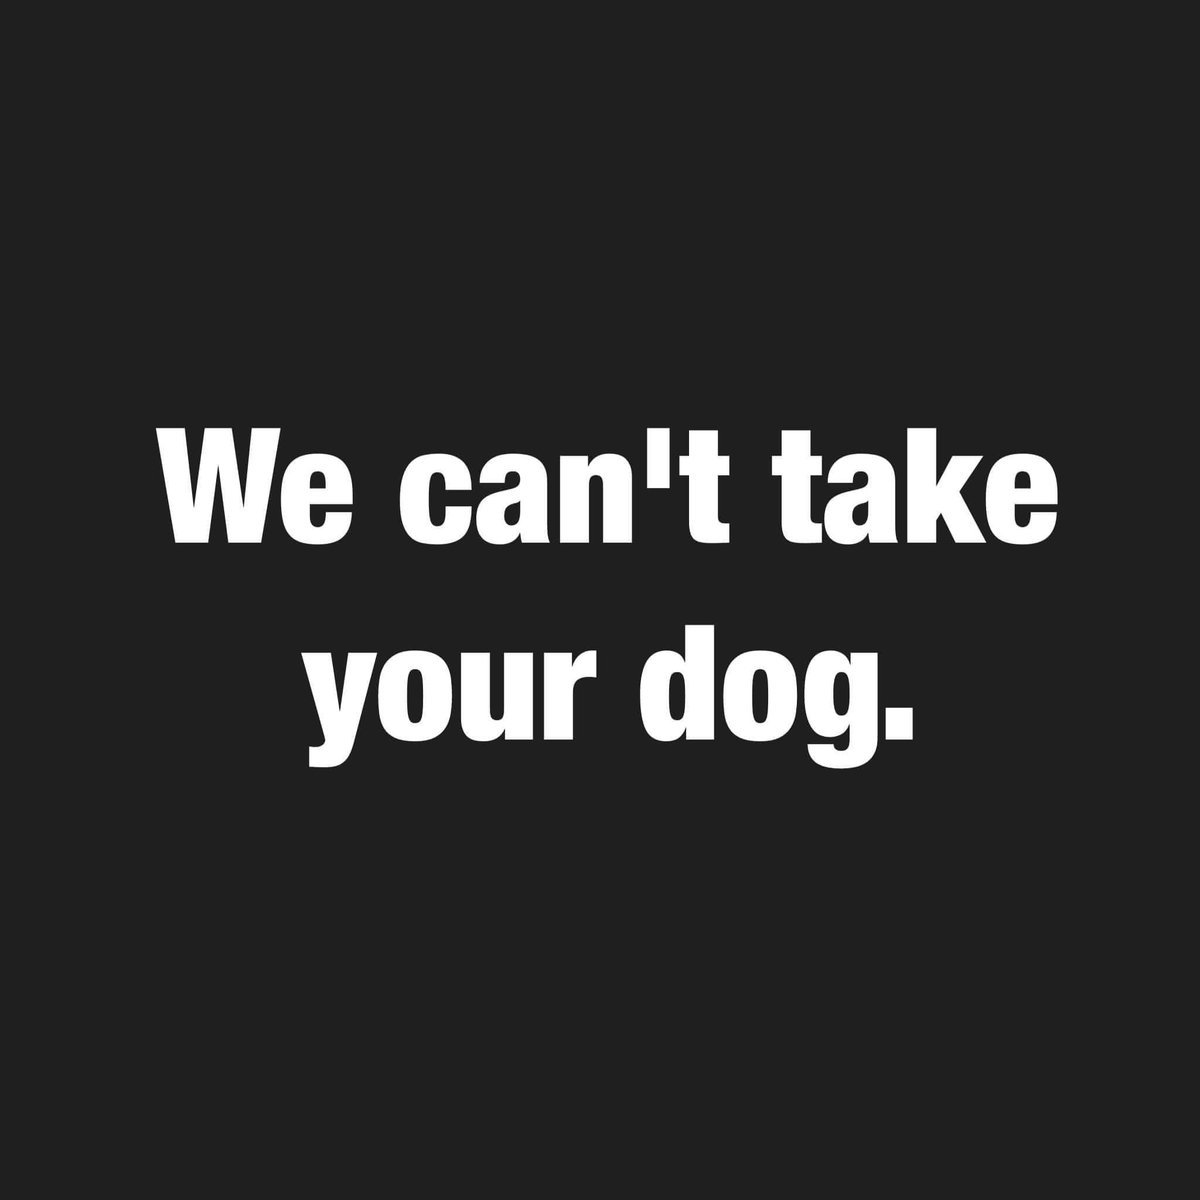 REPOST: not our words! But can relate and had to share! Credit goes to writer! When we started this rescue 14 years ago, our mission was to help the abused, neglected and discarded dogs in our area and beyond. Our mission has never been to relieve you of the commitment YOU